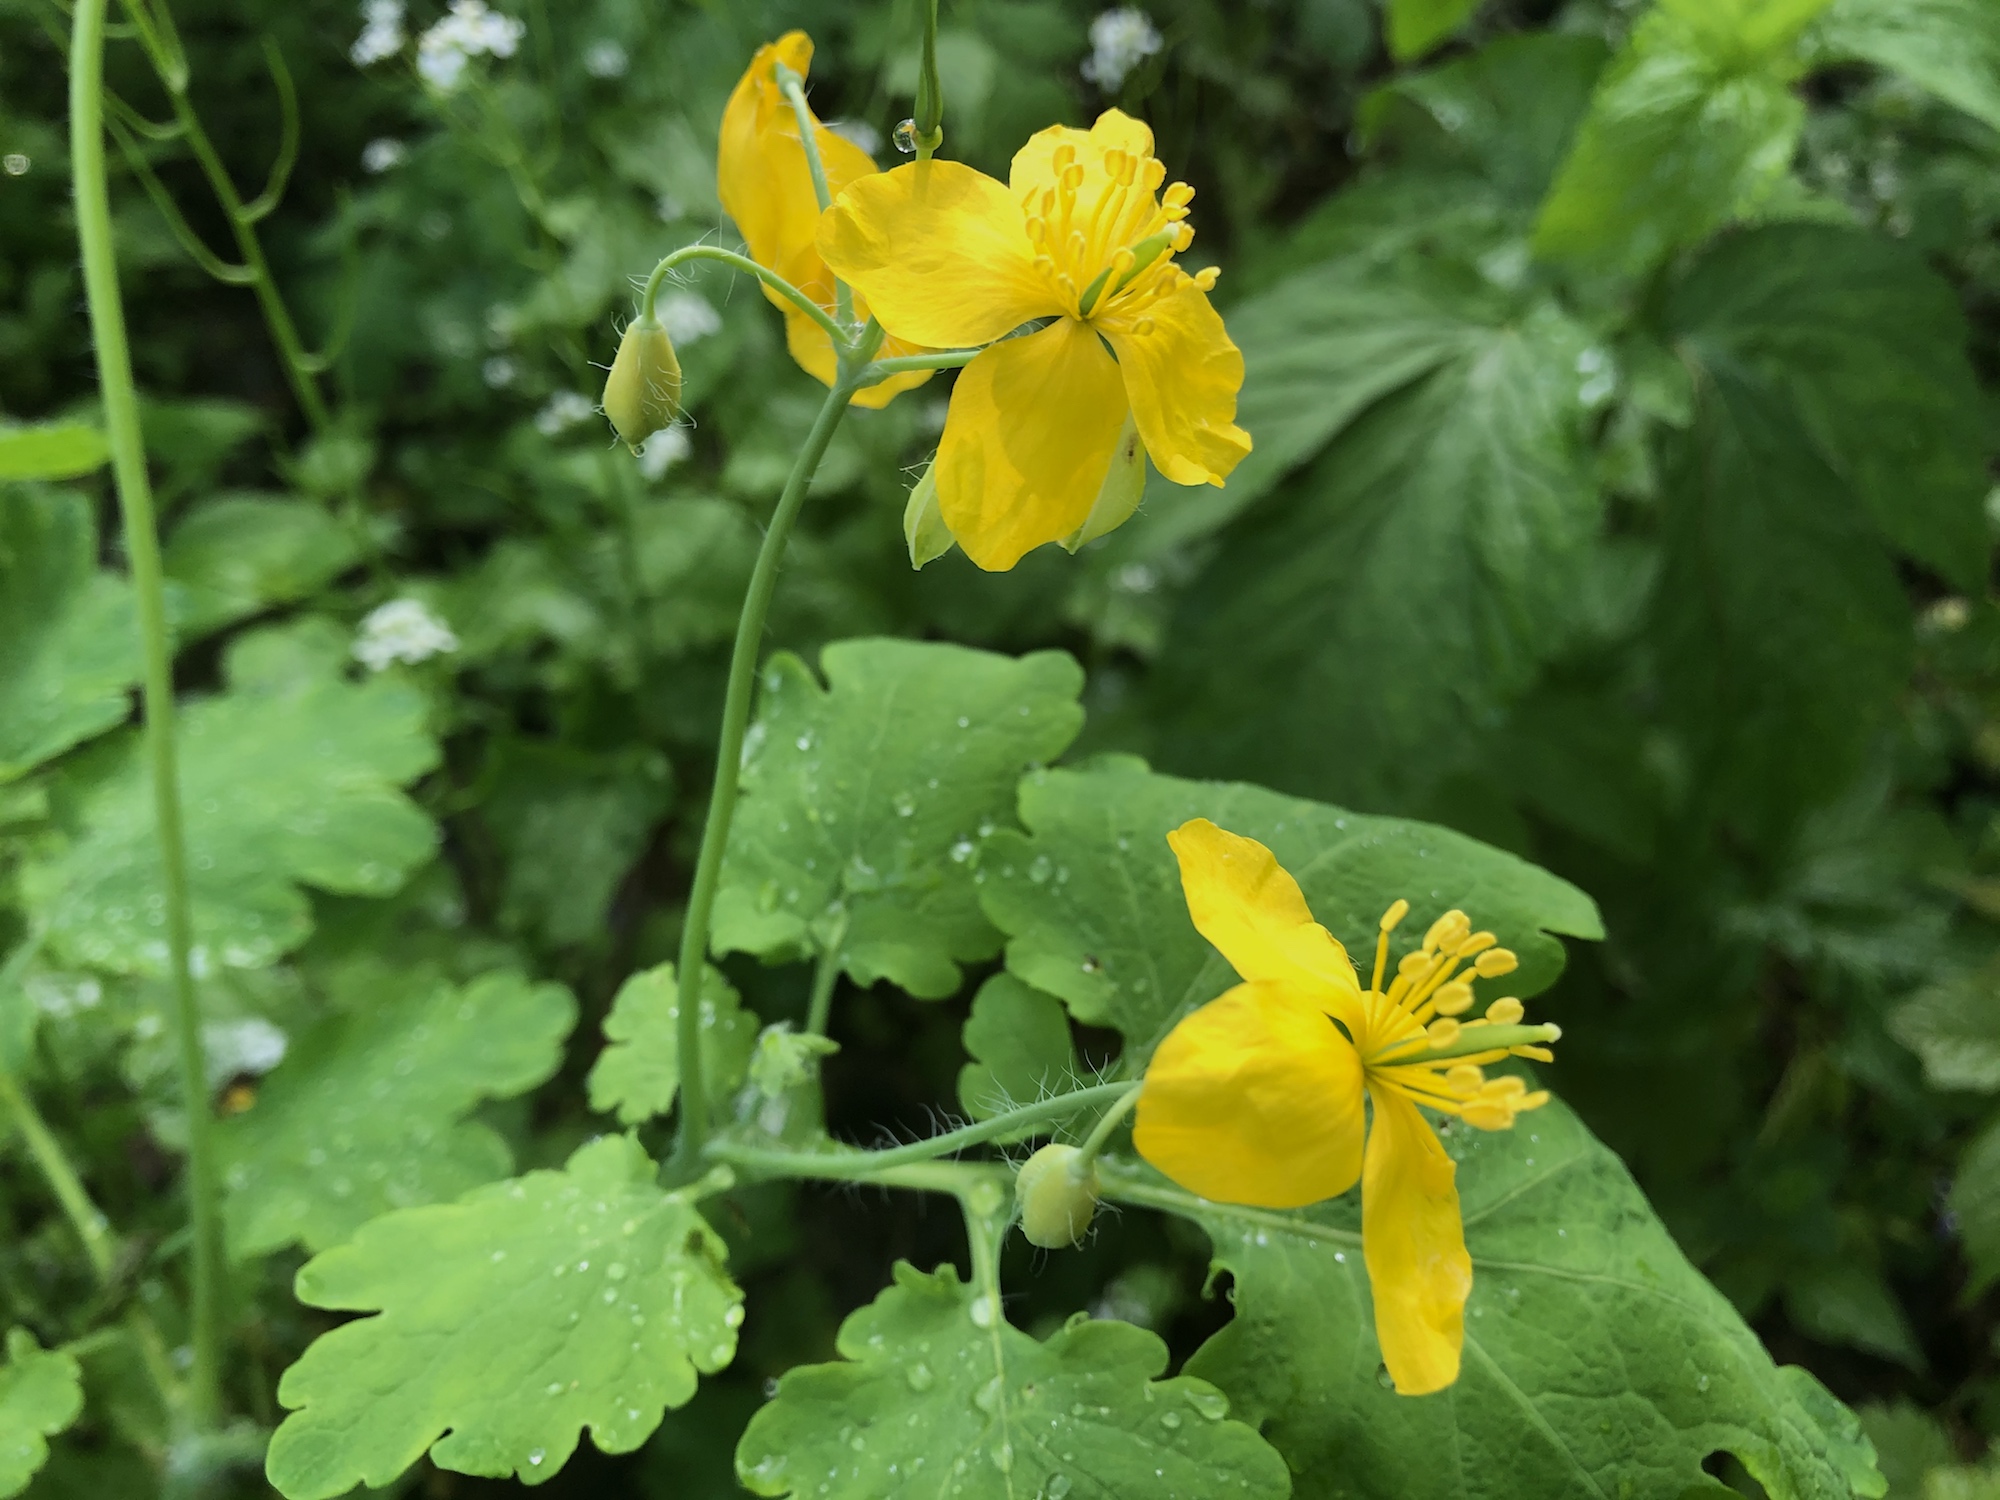 Greater Celandine by Duck Pond in Madison, Wisconsin on May 24, 2020.